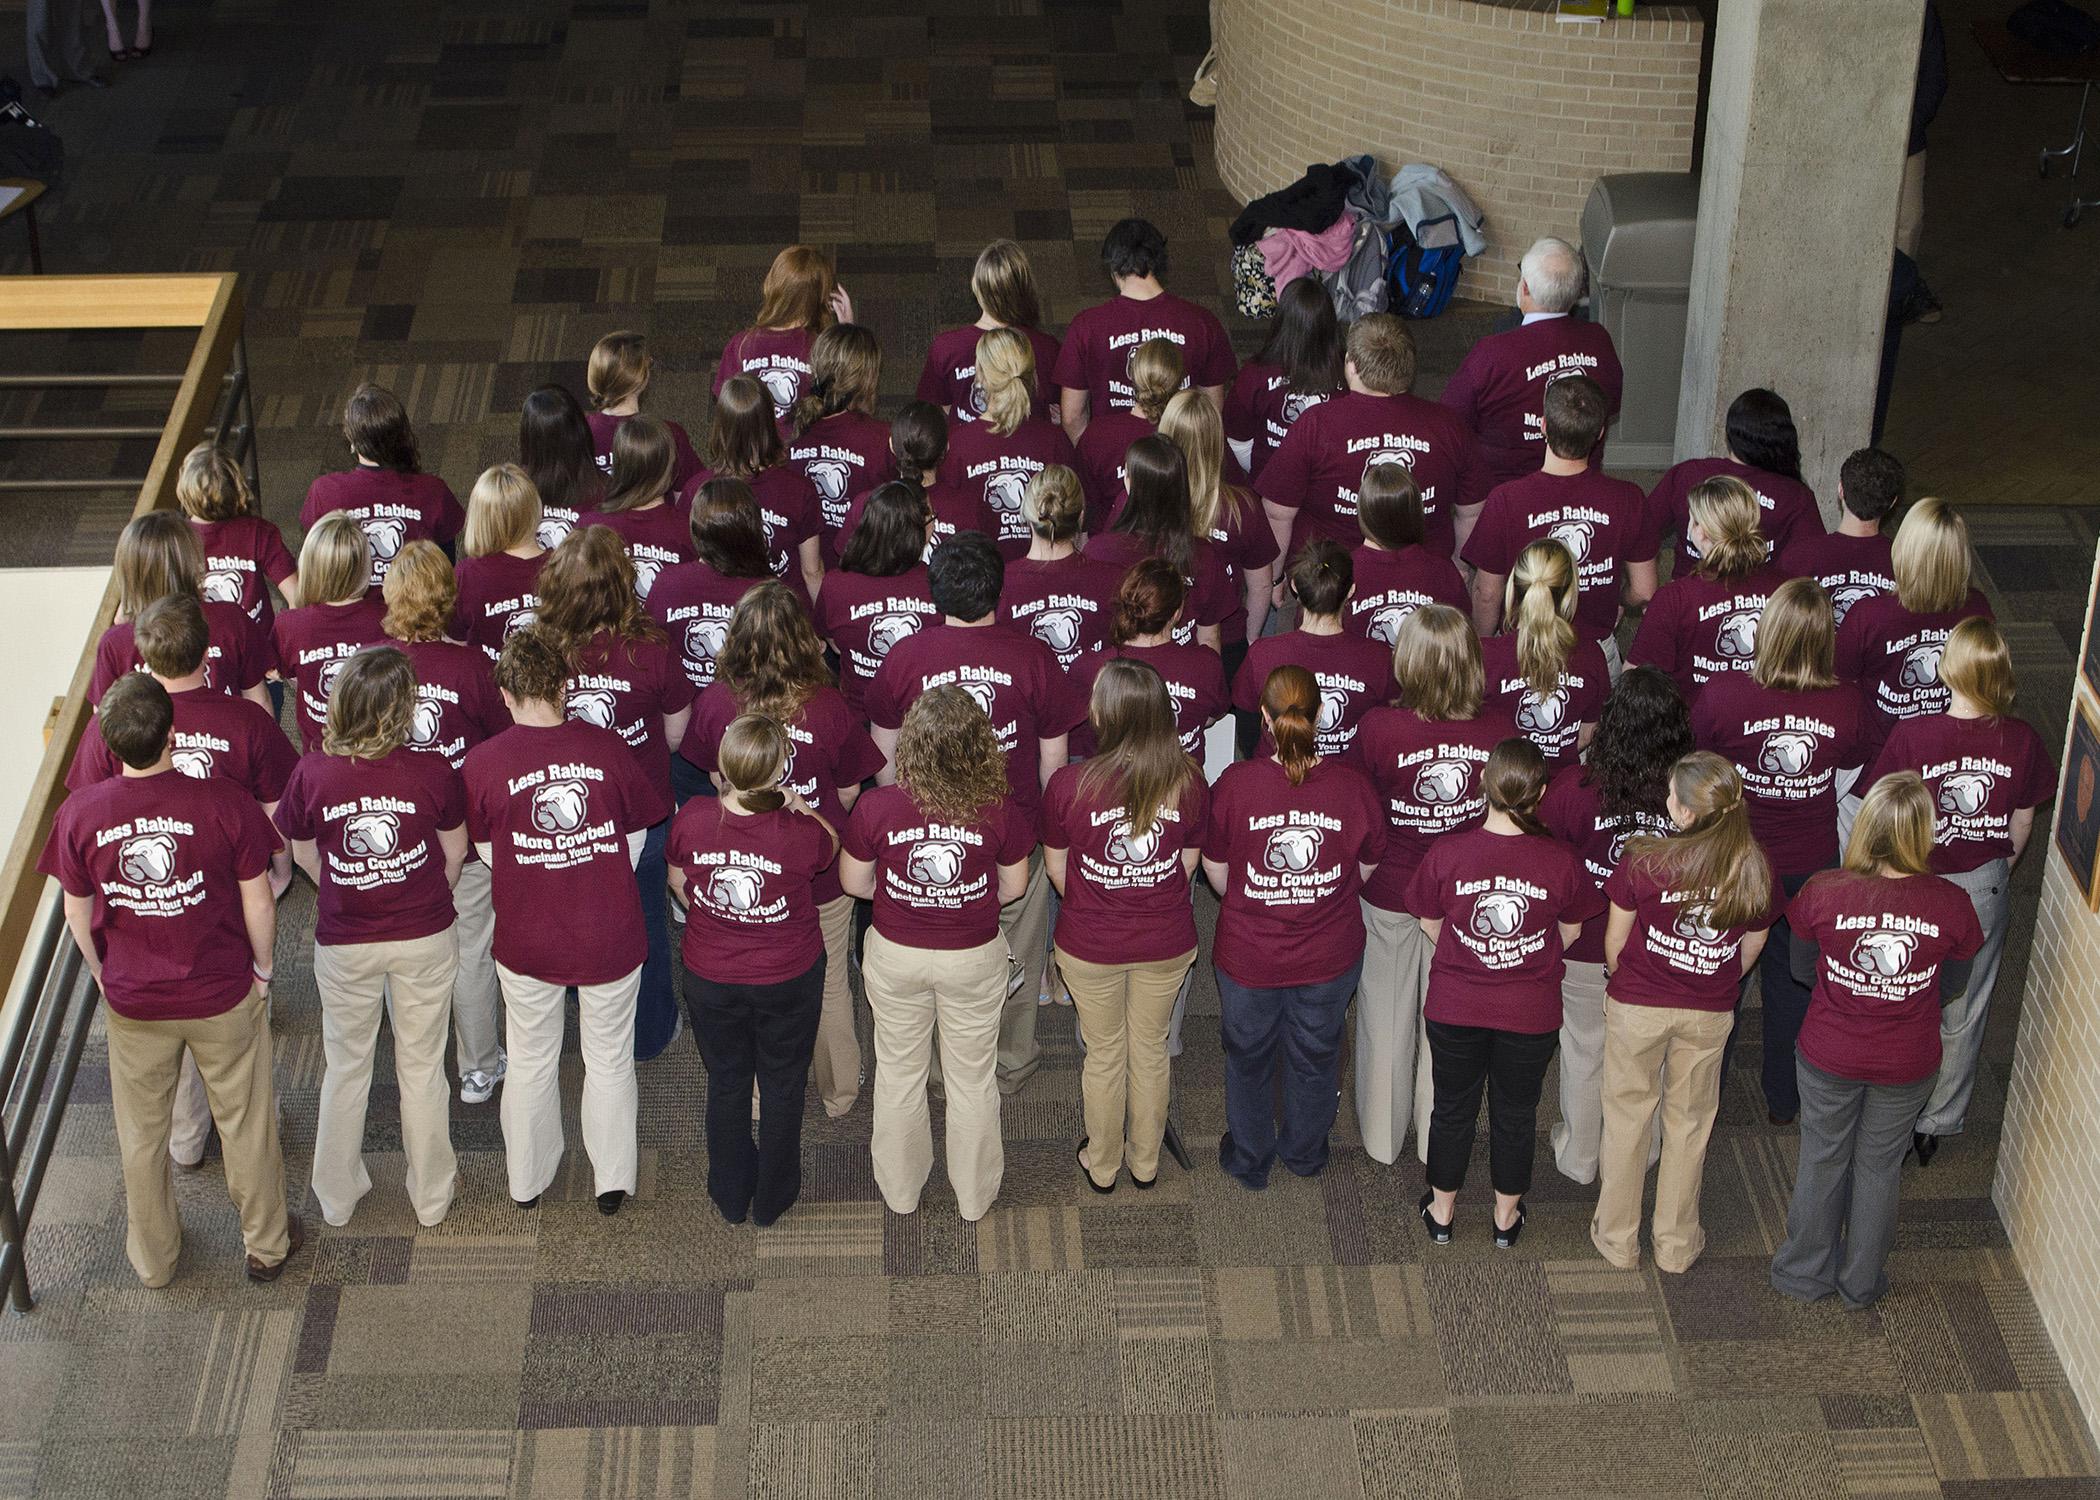 The Mississippi State University College of Veterinary Medicine’s Class of 2016 rings out the rabies prevention message with the tag line, “Less Rabies, More Cowbell.” The class performed several outreach and education projects and won the honor of hosting the annual Merial Rabies Symposium. (Photo by College of Veterinary Medicine/Tom Thompson)